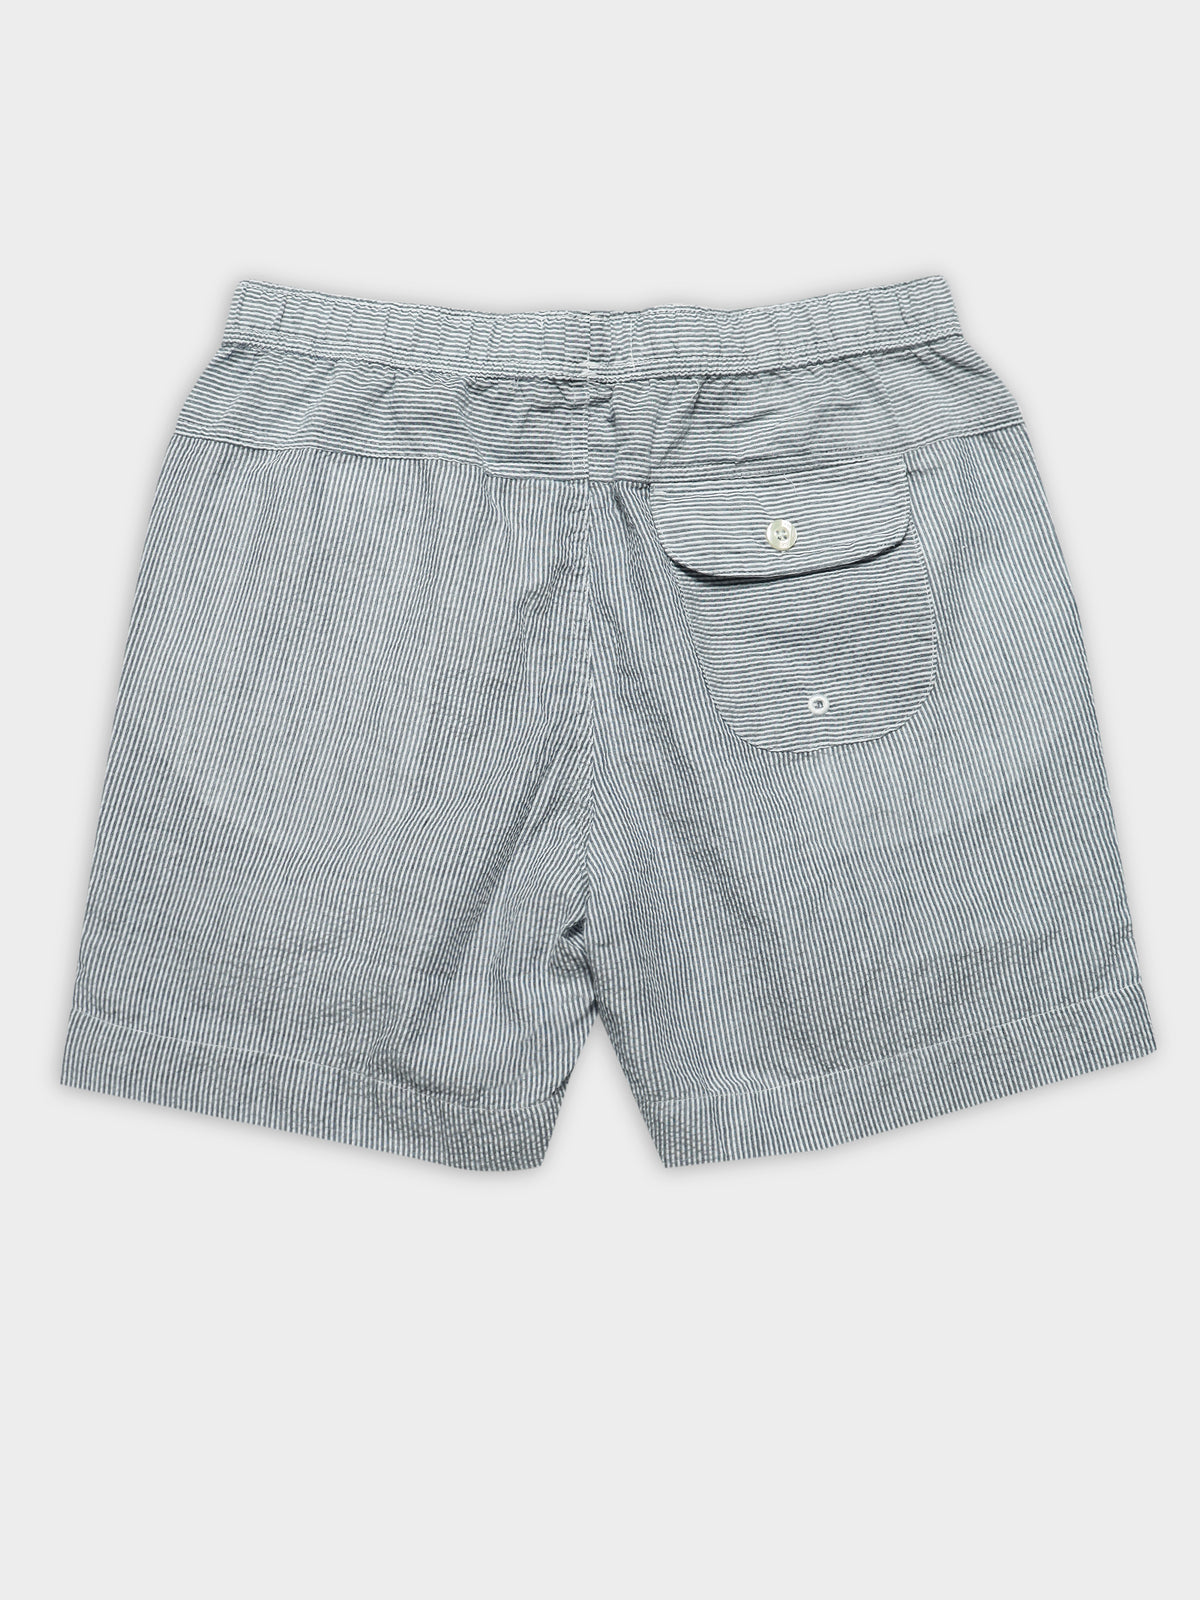 Wilfred Shorts in Blue &amp; White Stripe